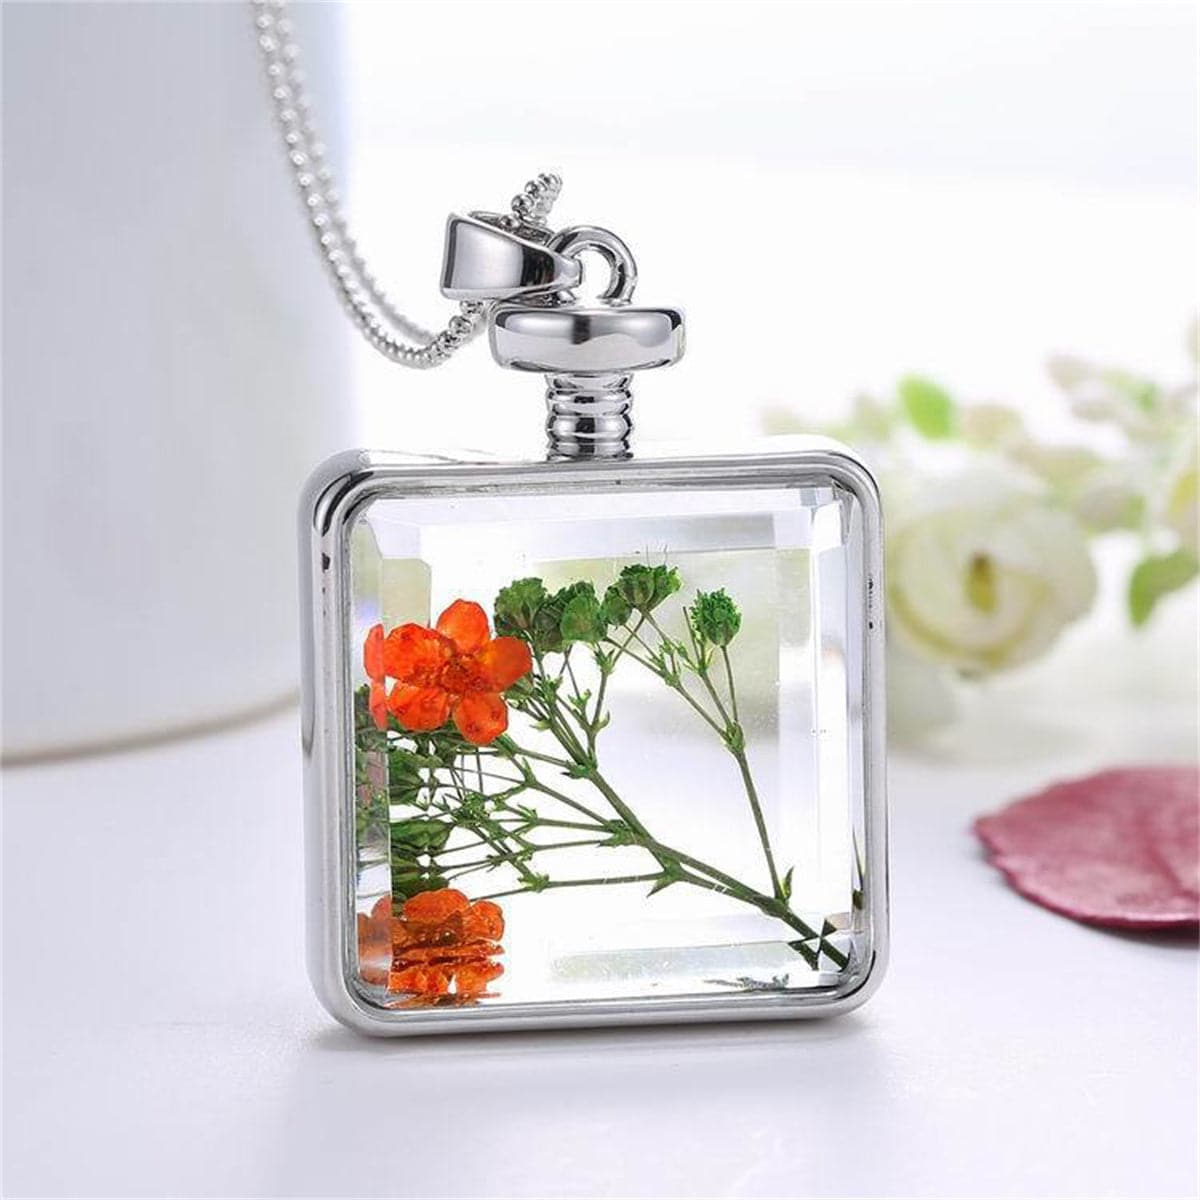 Green Pressed Flower & Silver-Plated Square Pendant Necklace